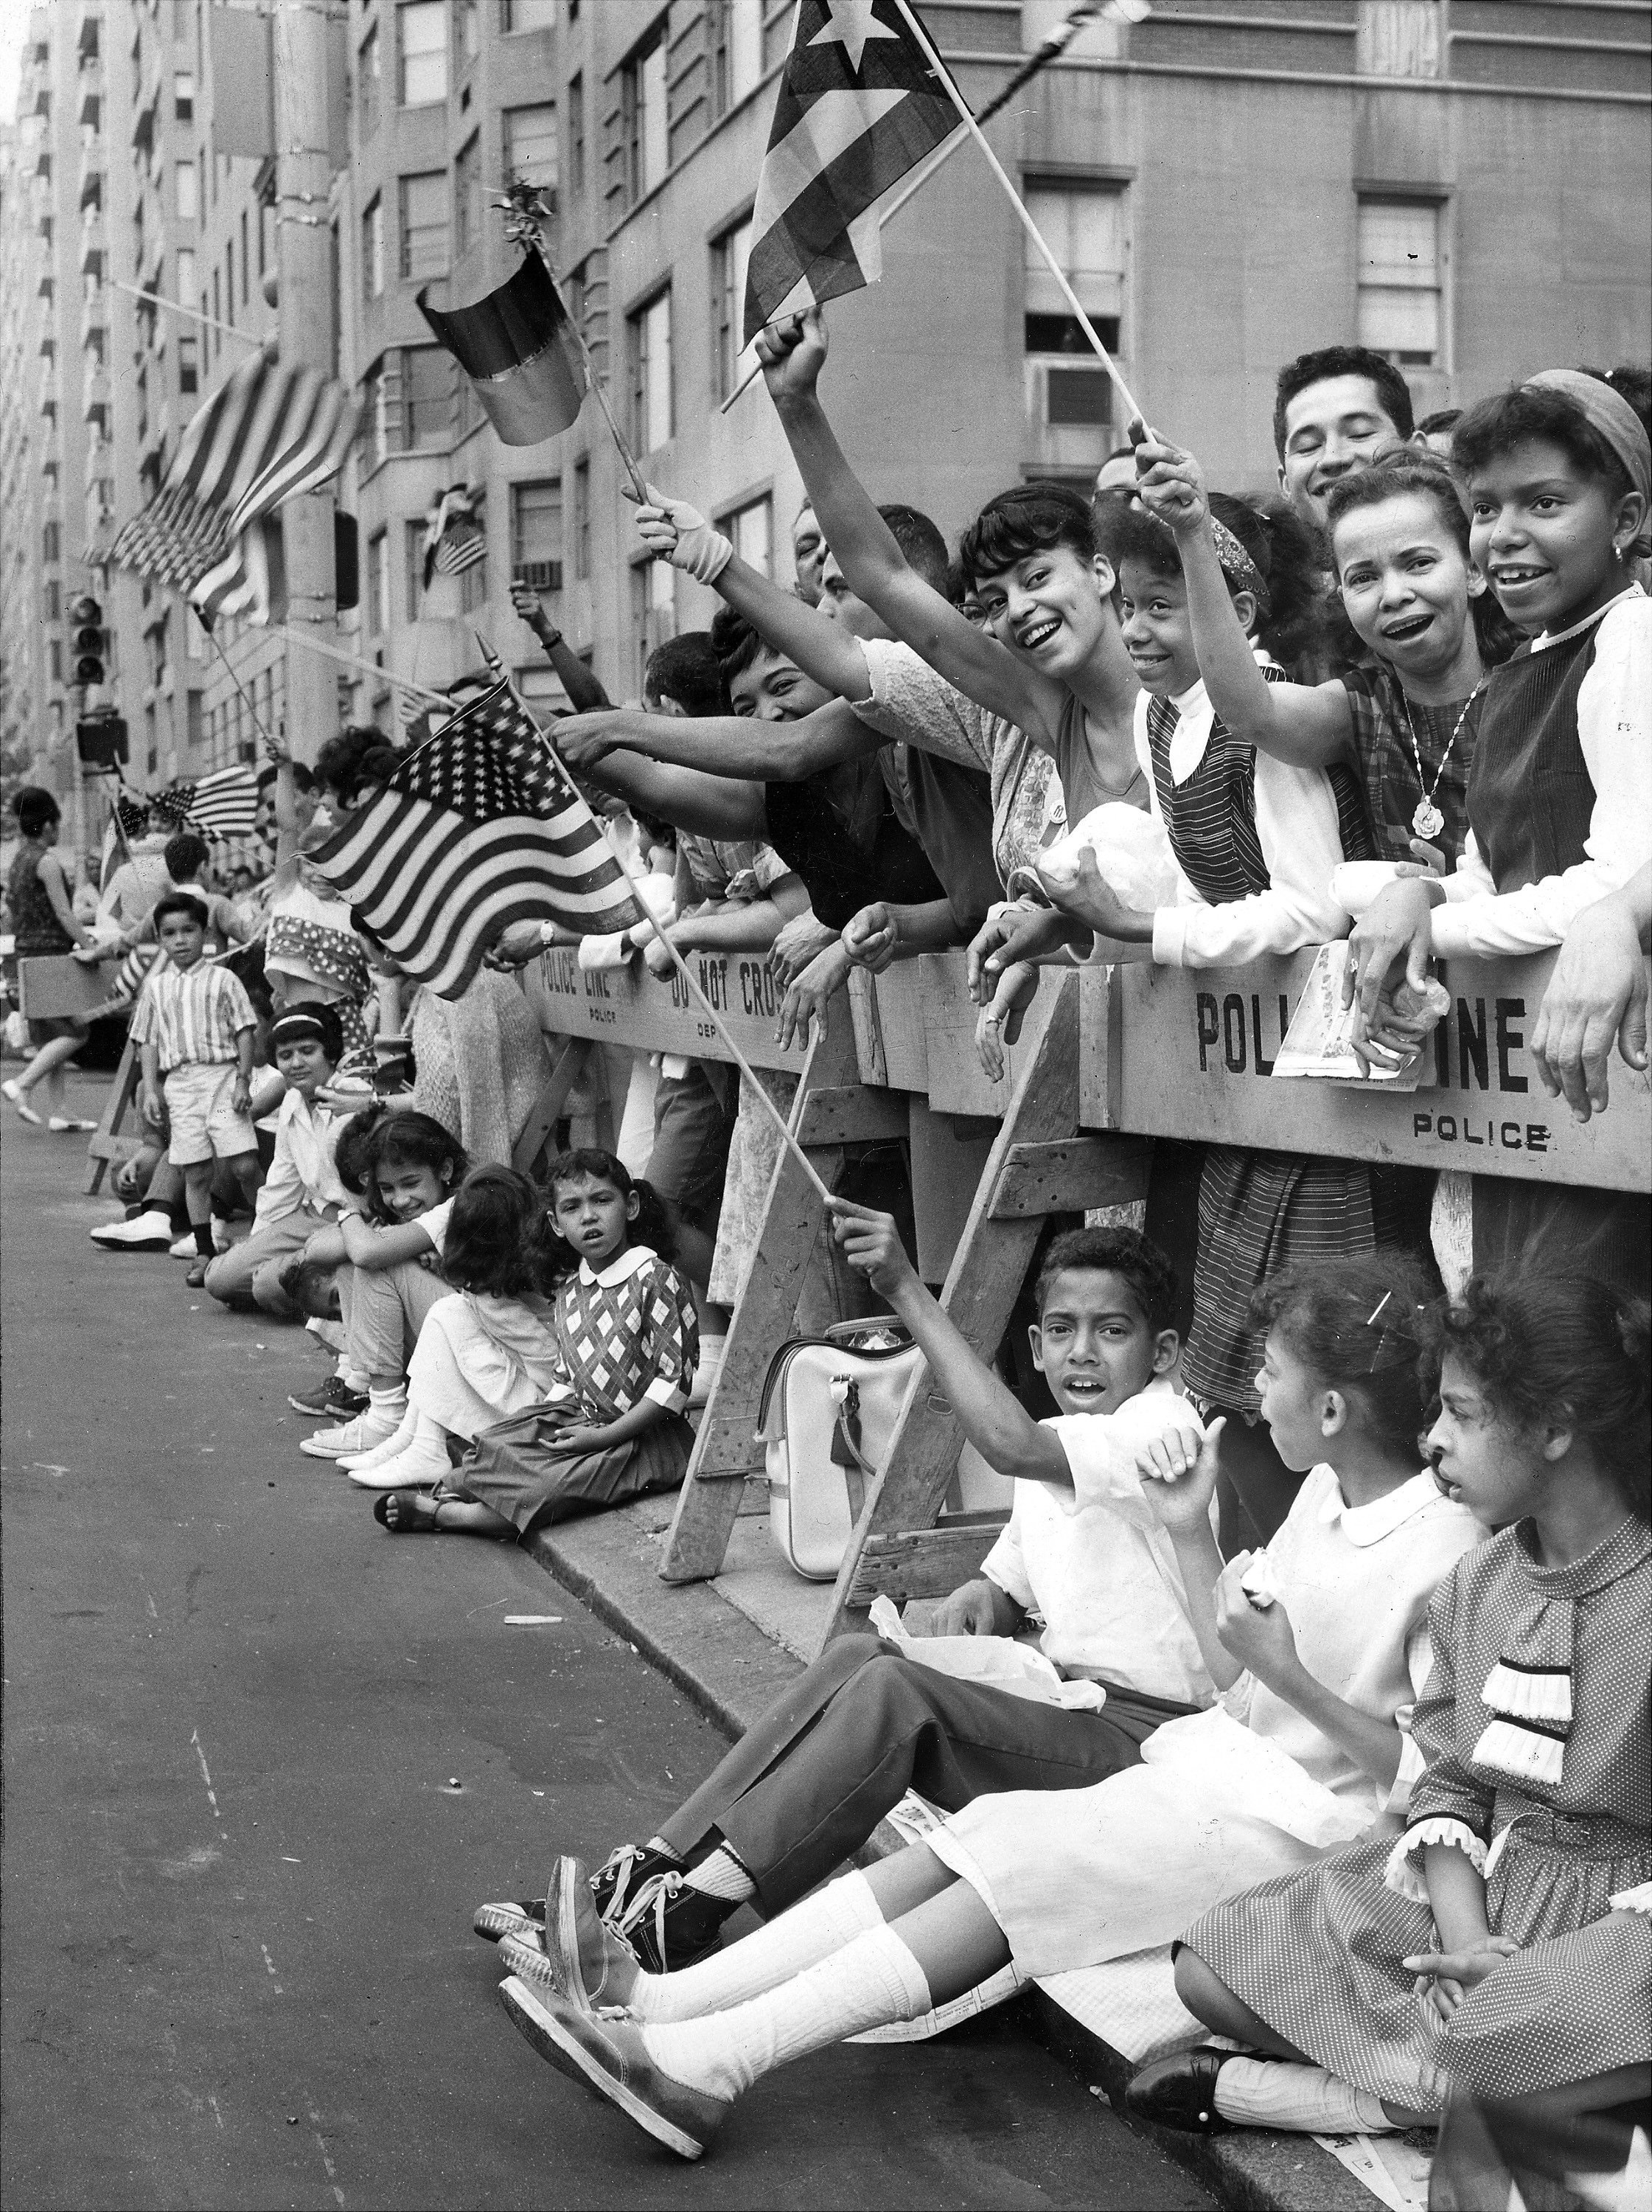 These Photos Capture Over 5 Decades Of Pride At The Puerto Rican Day Parade HuffPost Voices picture